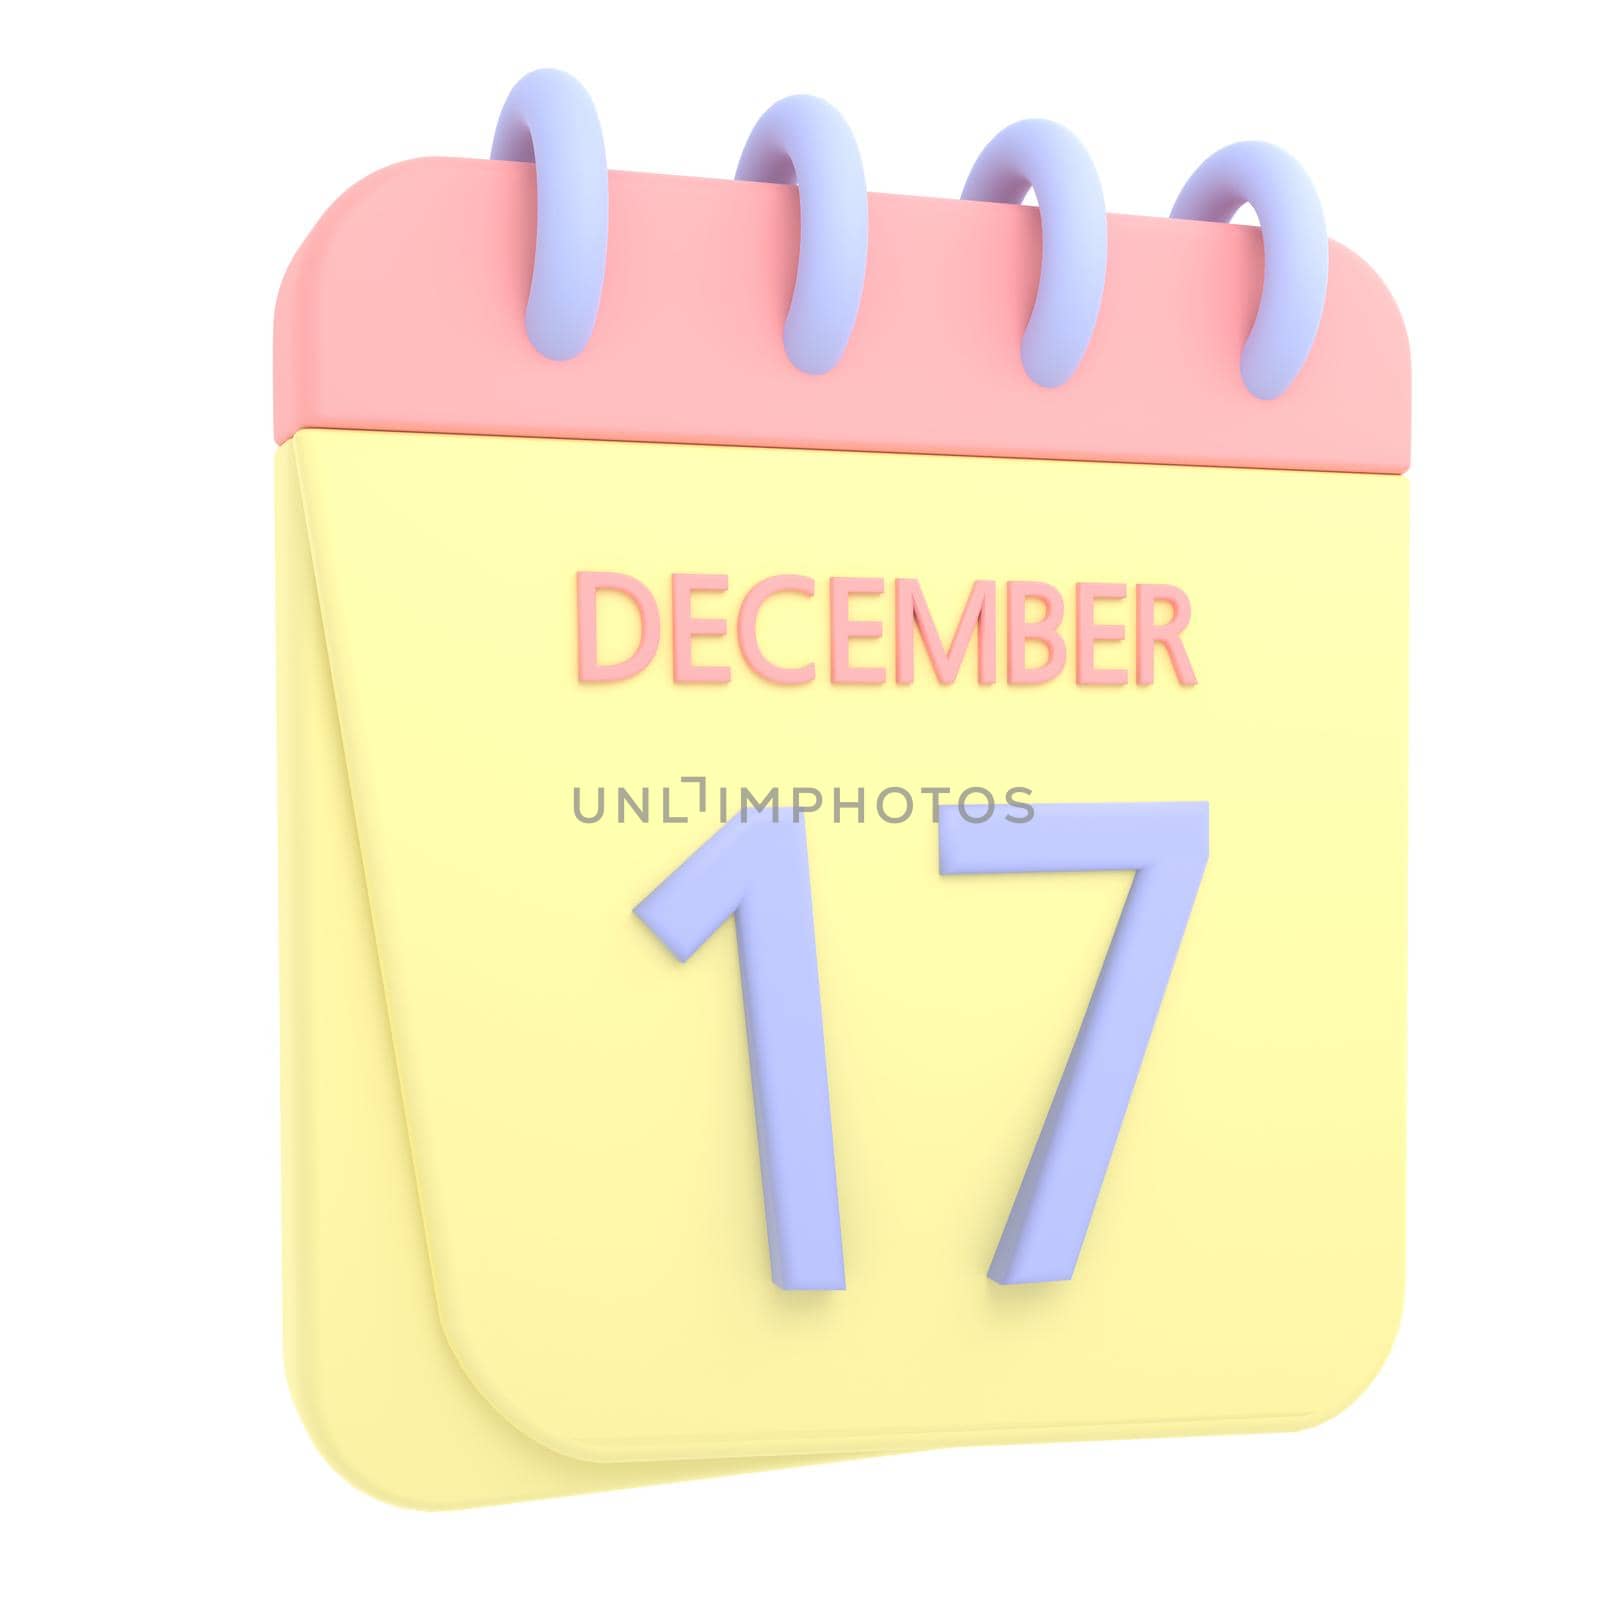 17th December 3D calendar icon. Web style. High resolution image. White background